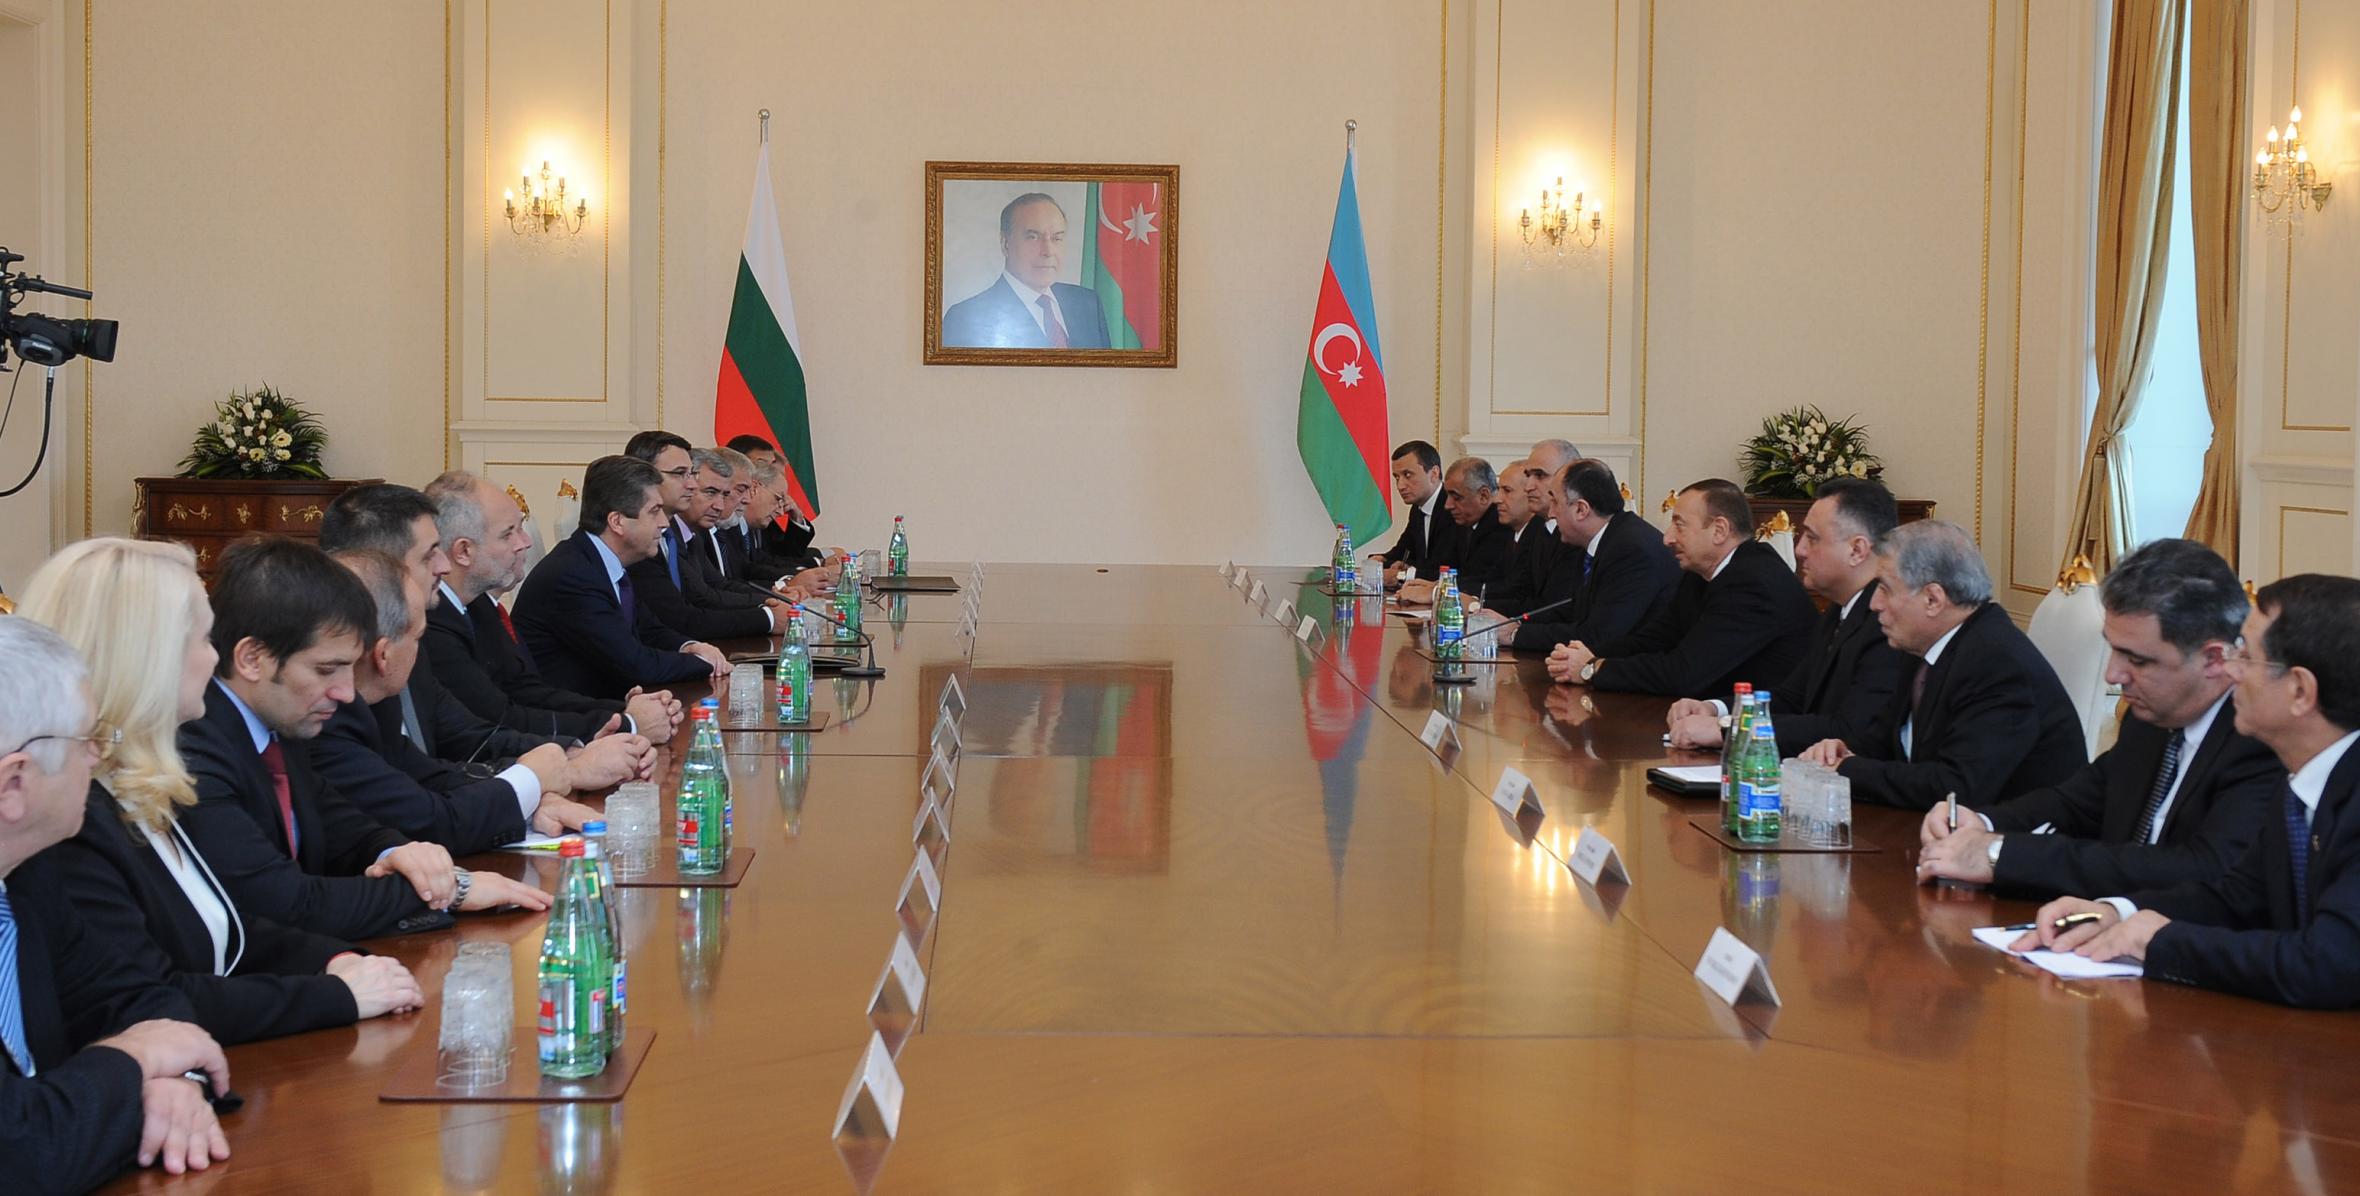 Ilham Aliyev and Bulgarian President Georgi Parvanov held negotiations in an expanded format with the participation of delegations